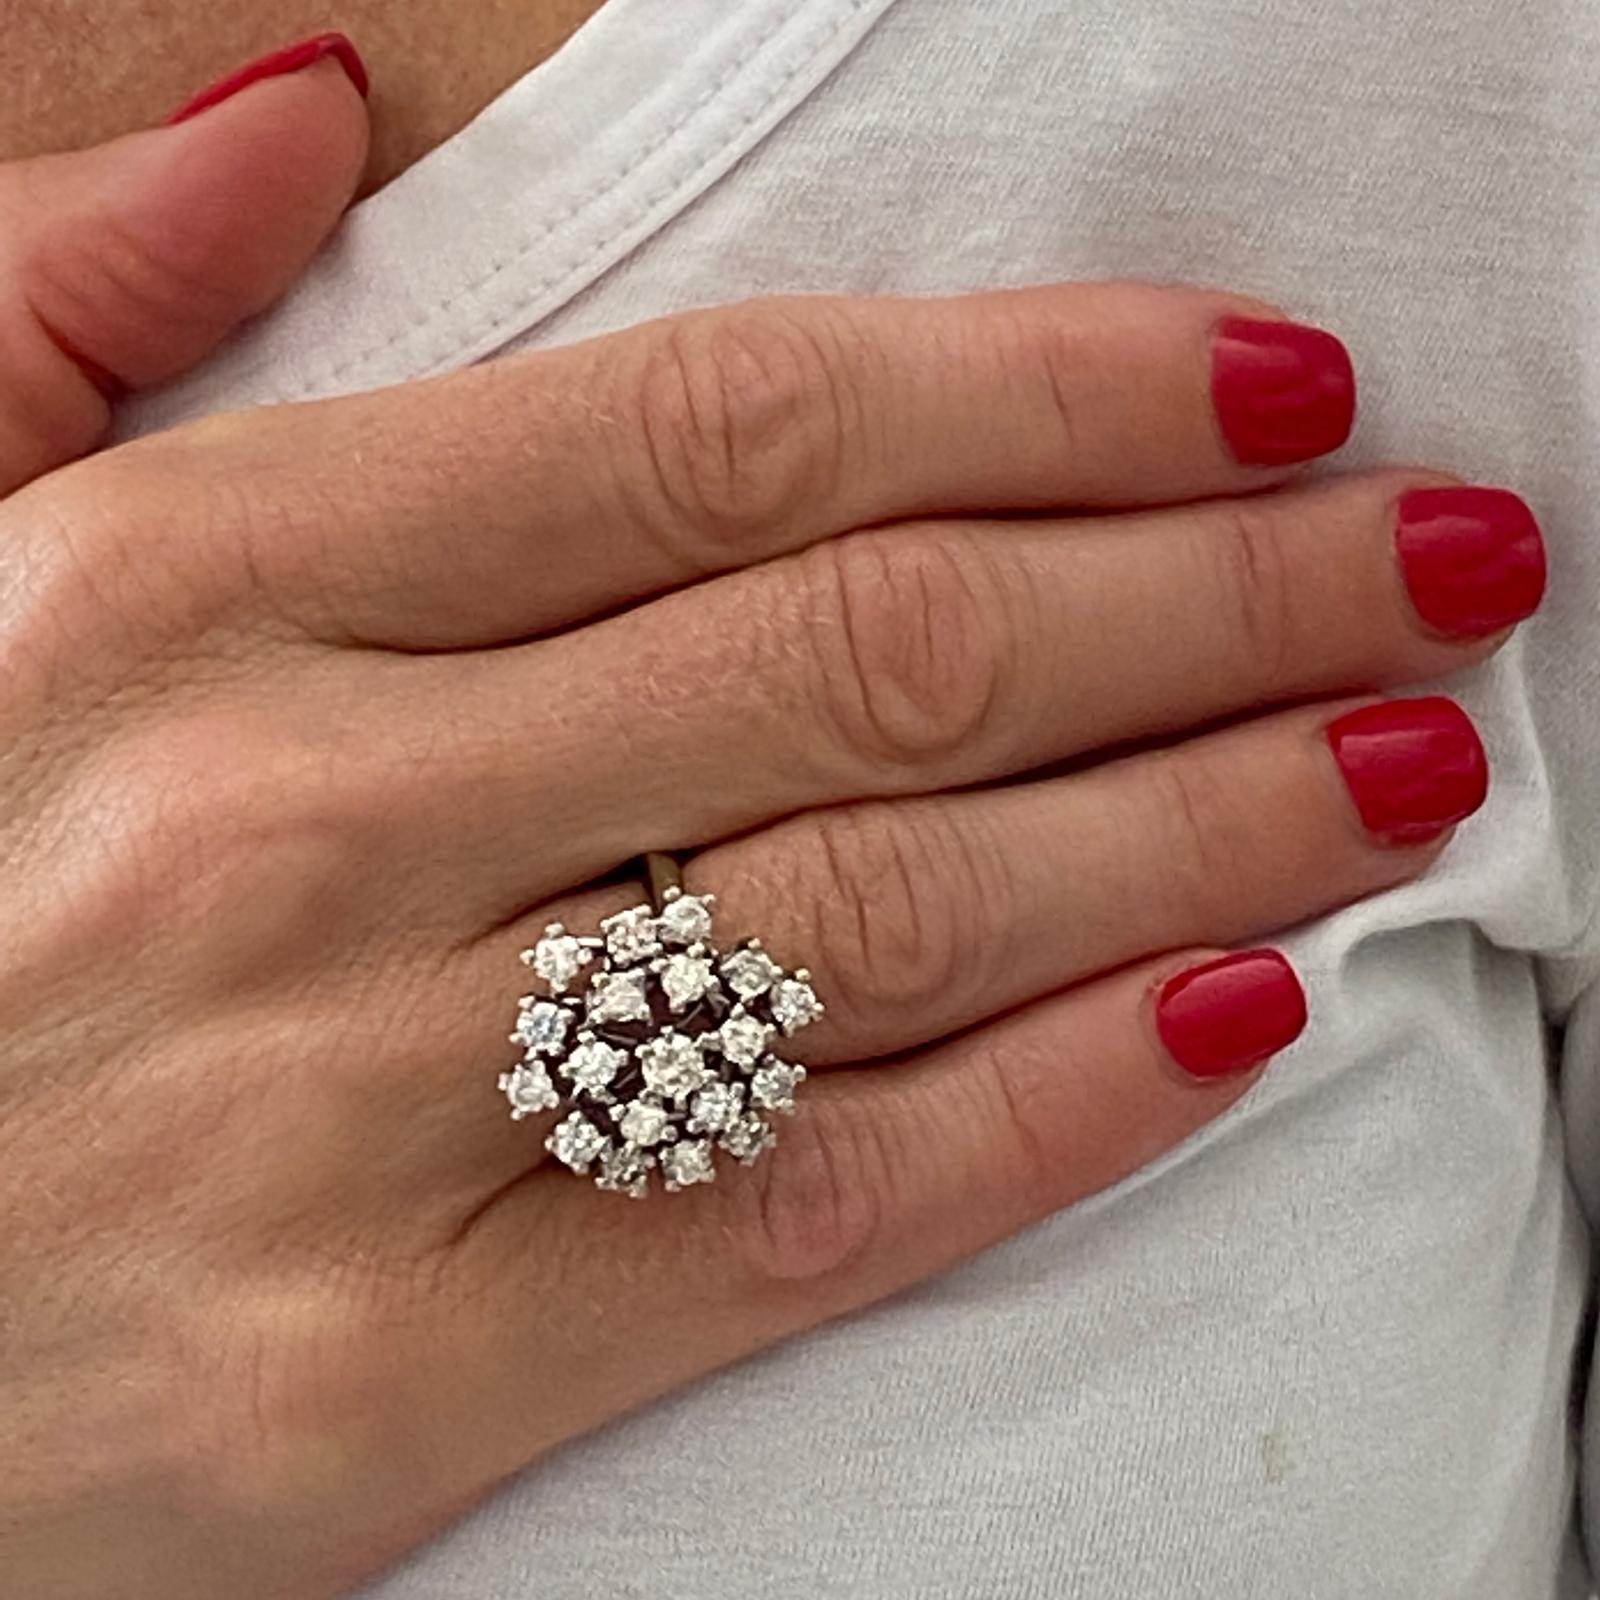 Diamond vintage snowflake ring fashioned in 14 karat white gold. The ring features 19 round brilliant cut diamonds weighing 2.00 carat total weight and graded H-J color and SI clarity. The ring measures 20mm in diameter and is currently size 7.75